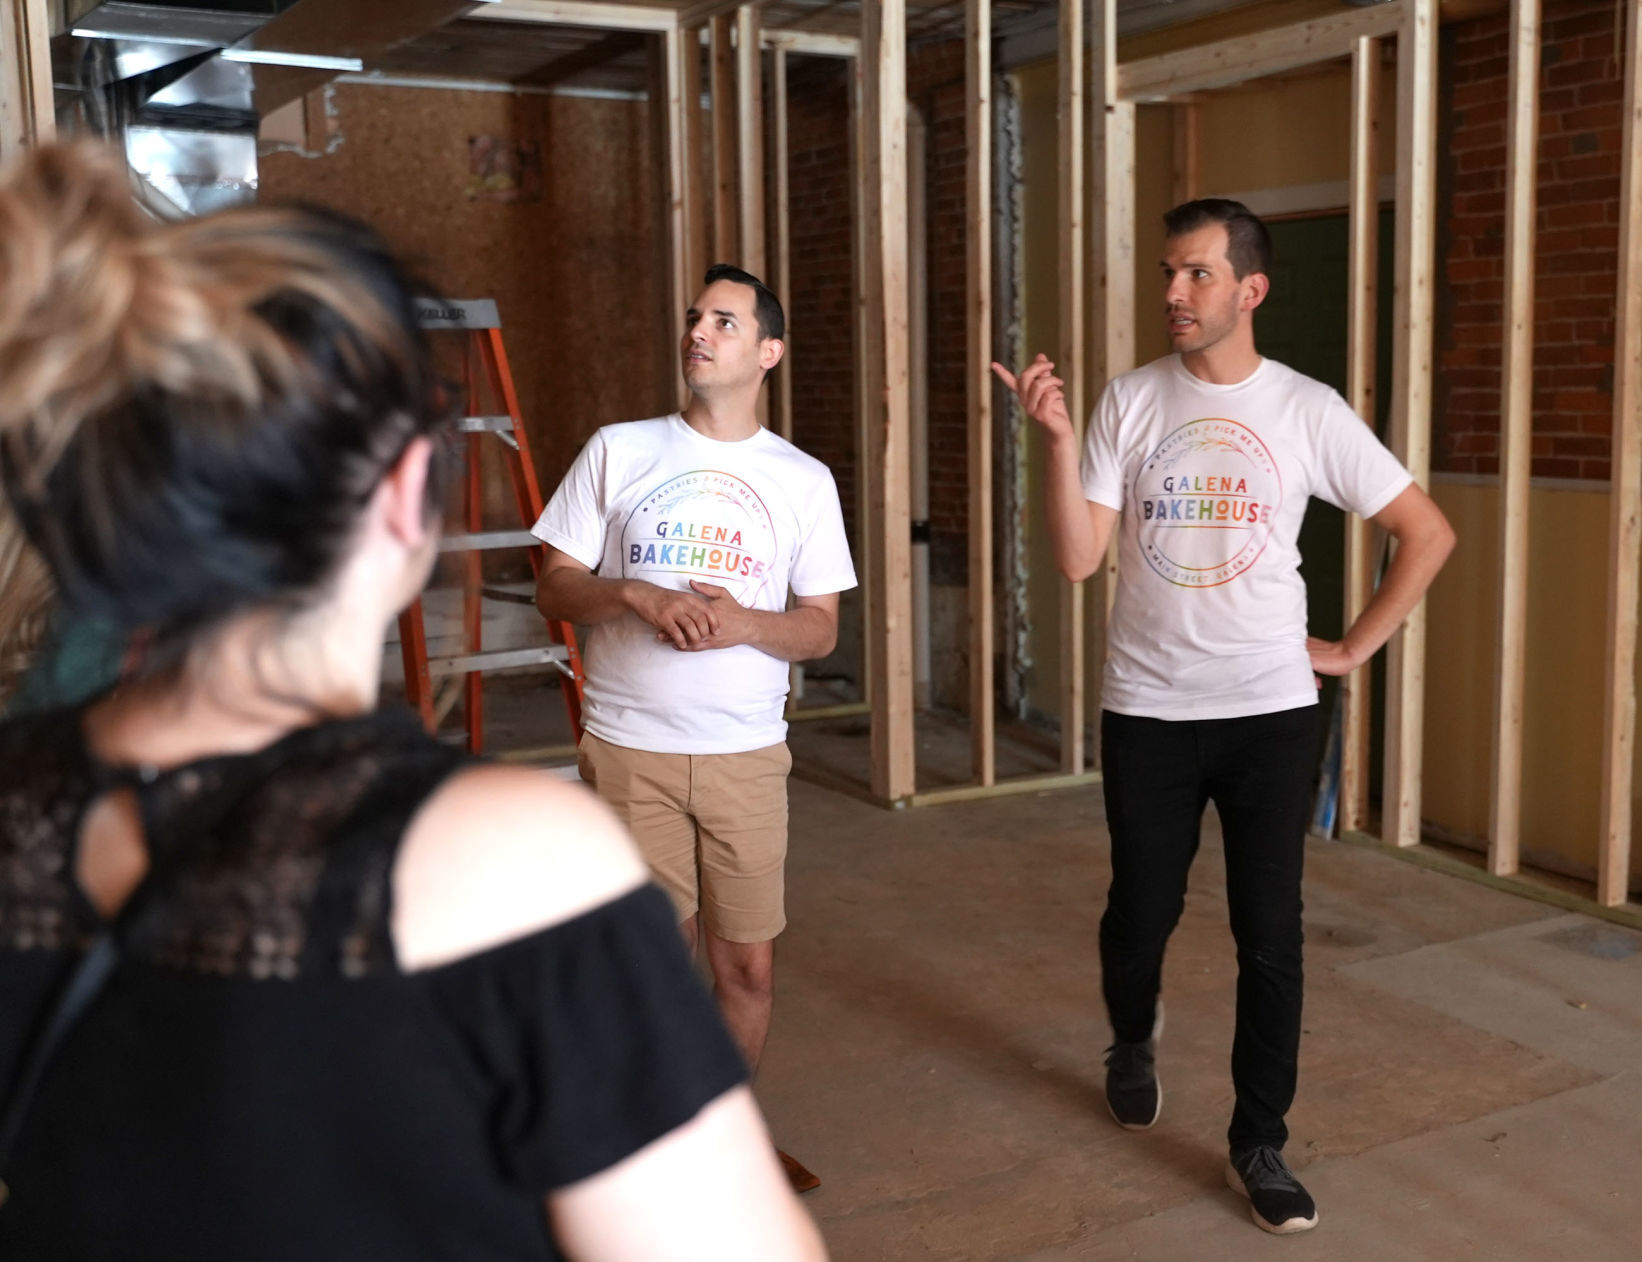 Owners Alex Arroyo (left) and Geoff Karnish plan to open Galena Bakehouse at 421 S. Main St. in Galena, Ill., in early August.    PHOTO CREDIT: PAUL KURUTSIDES